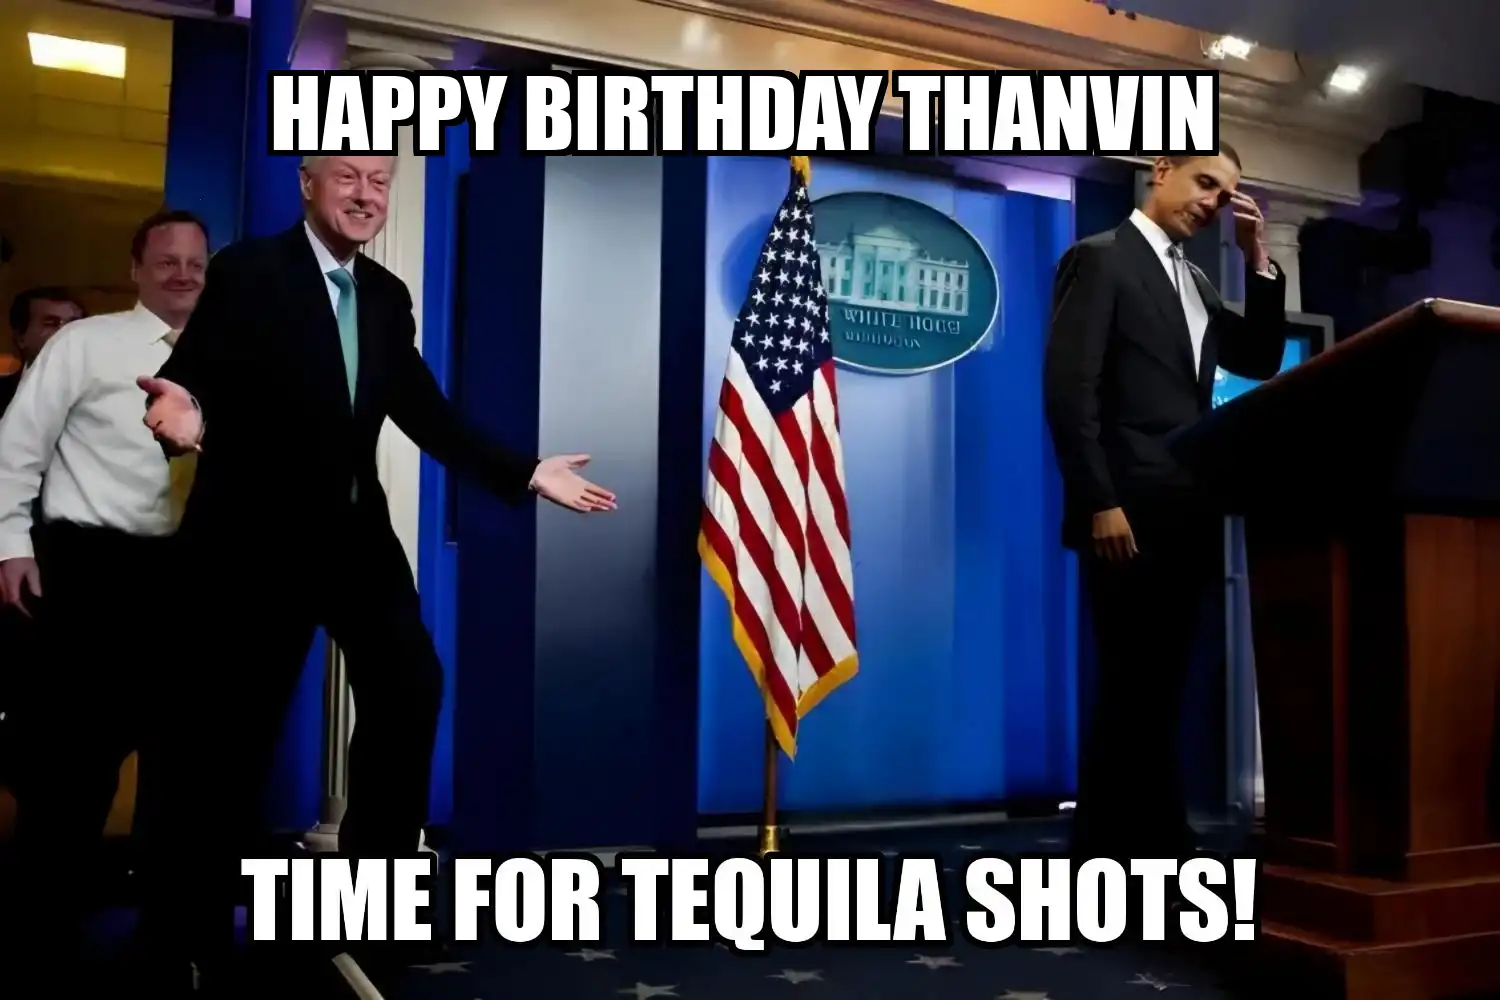 Happy Birthday Thanvin Time For Tequila Shots Memes